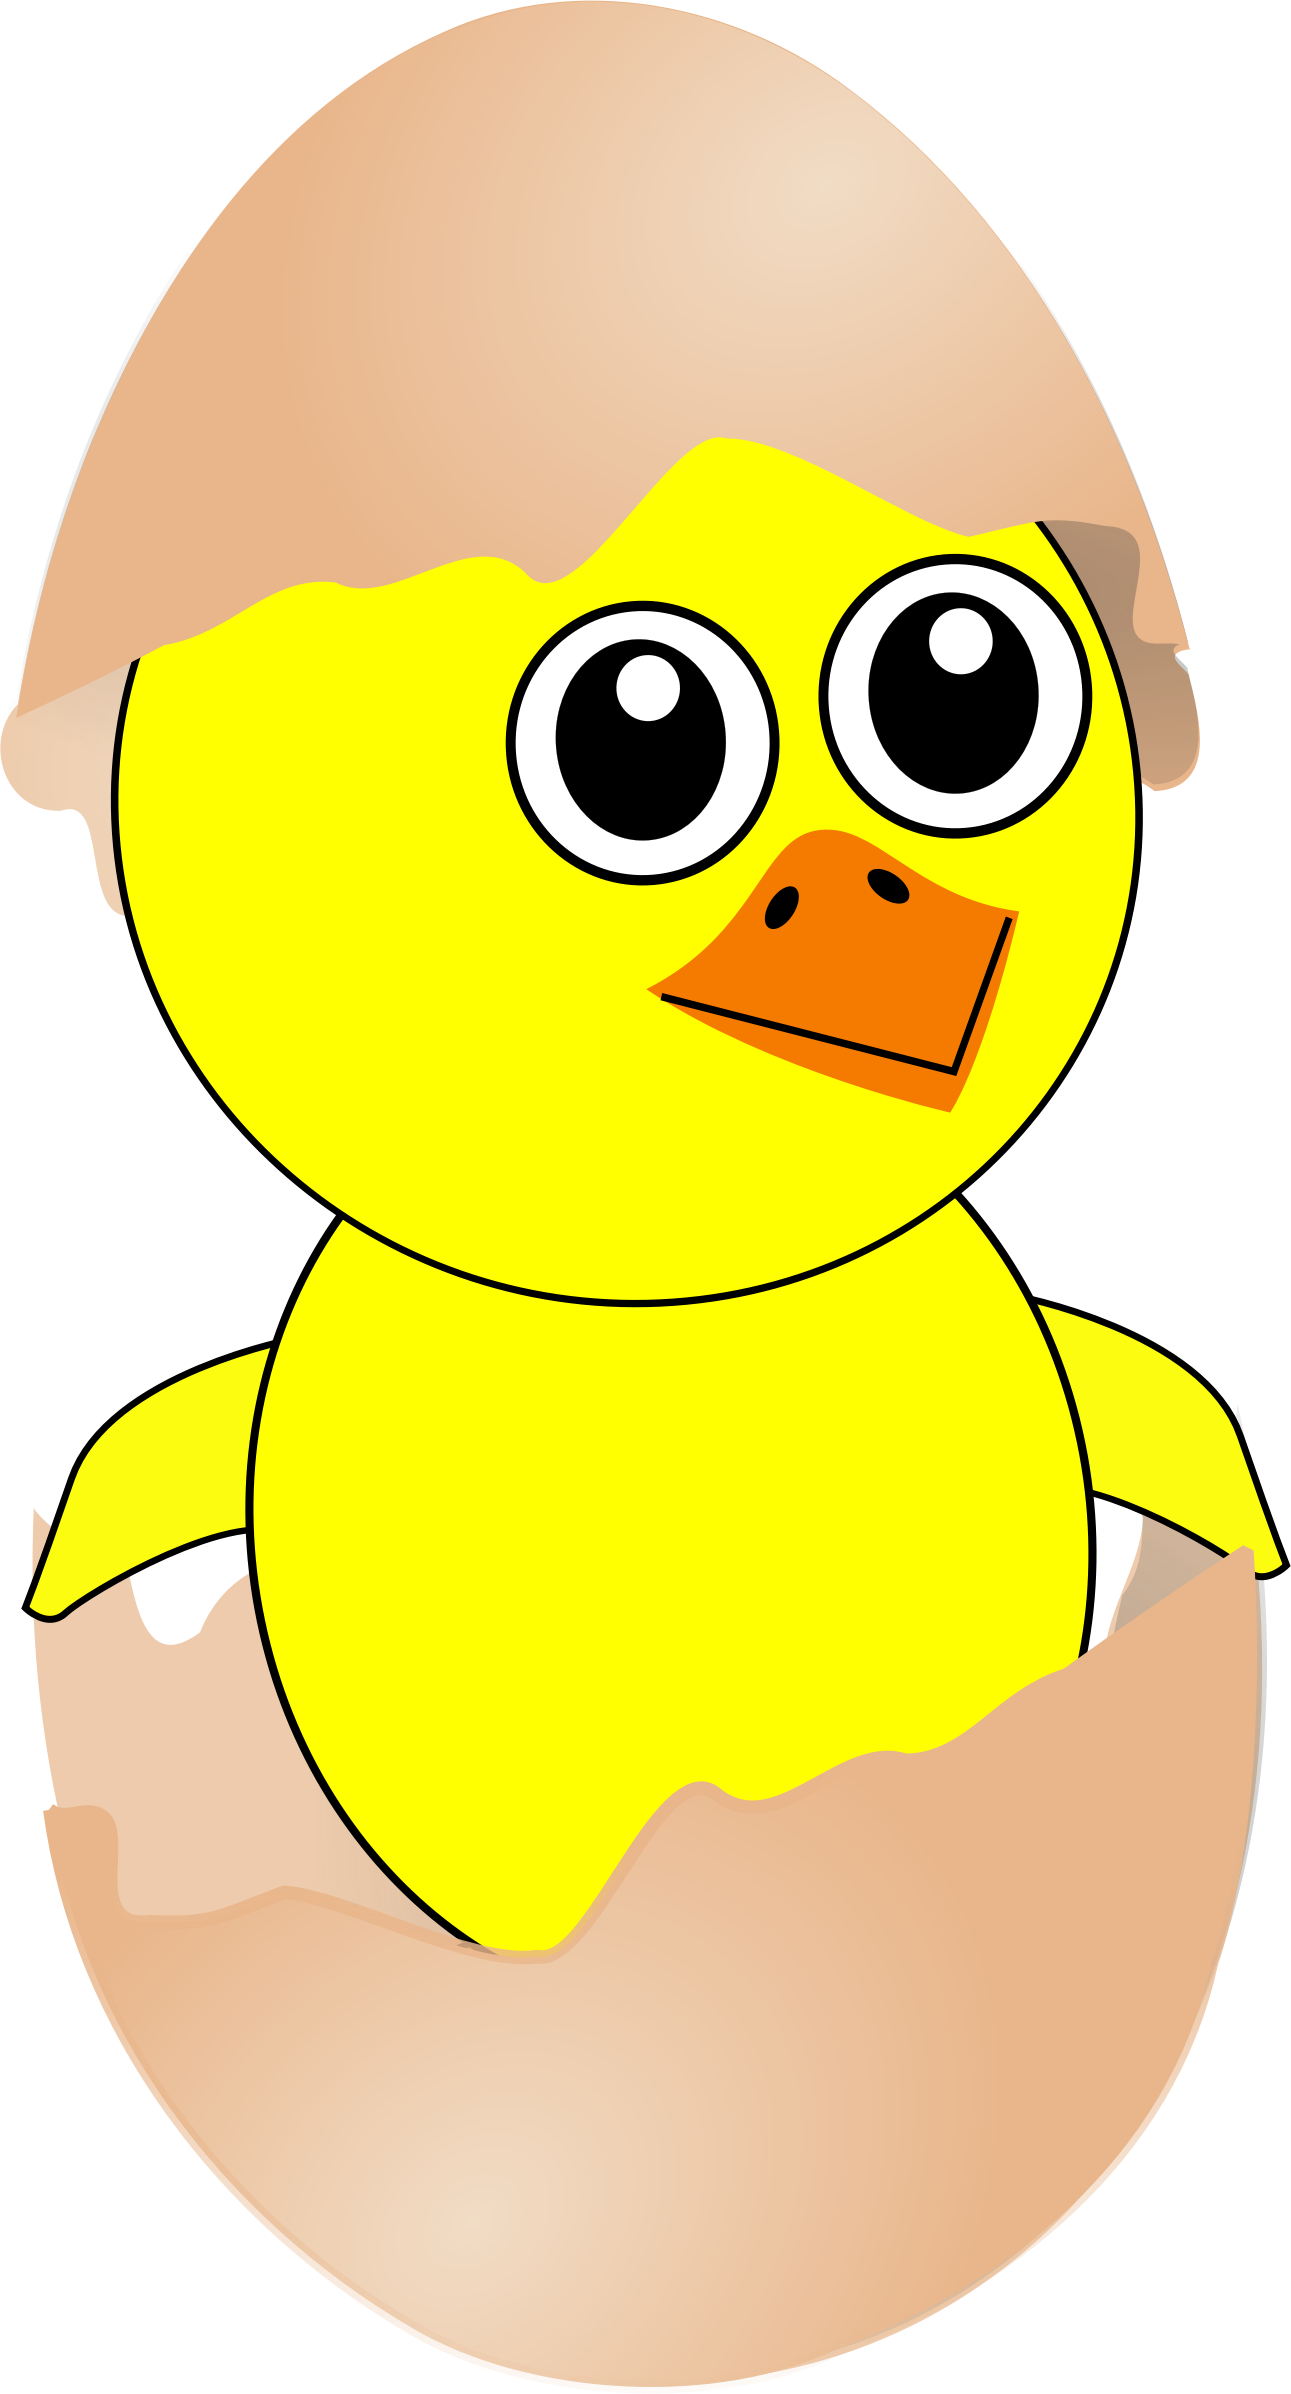 chick hatching clipart - photo #21